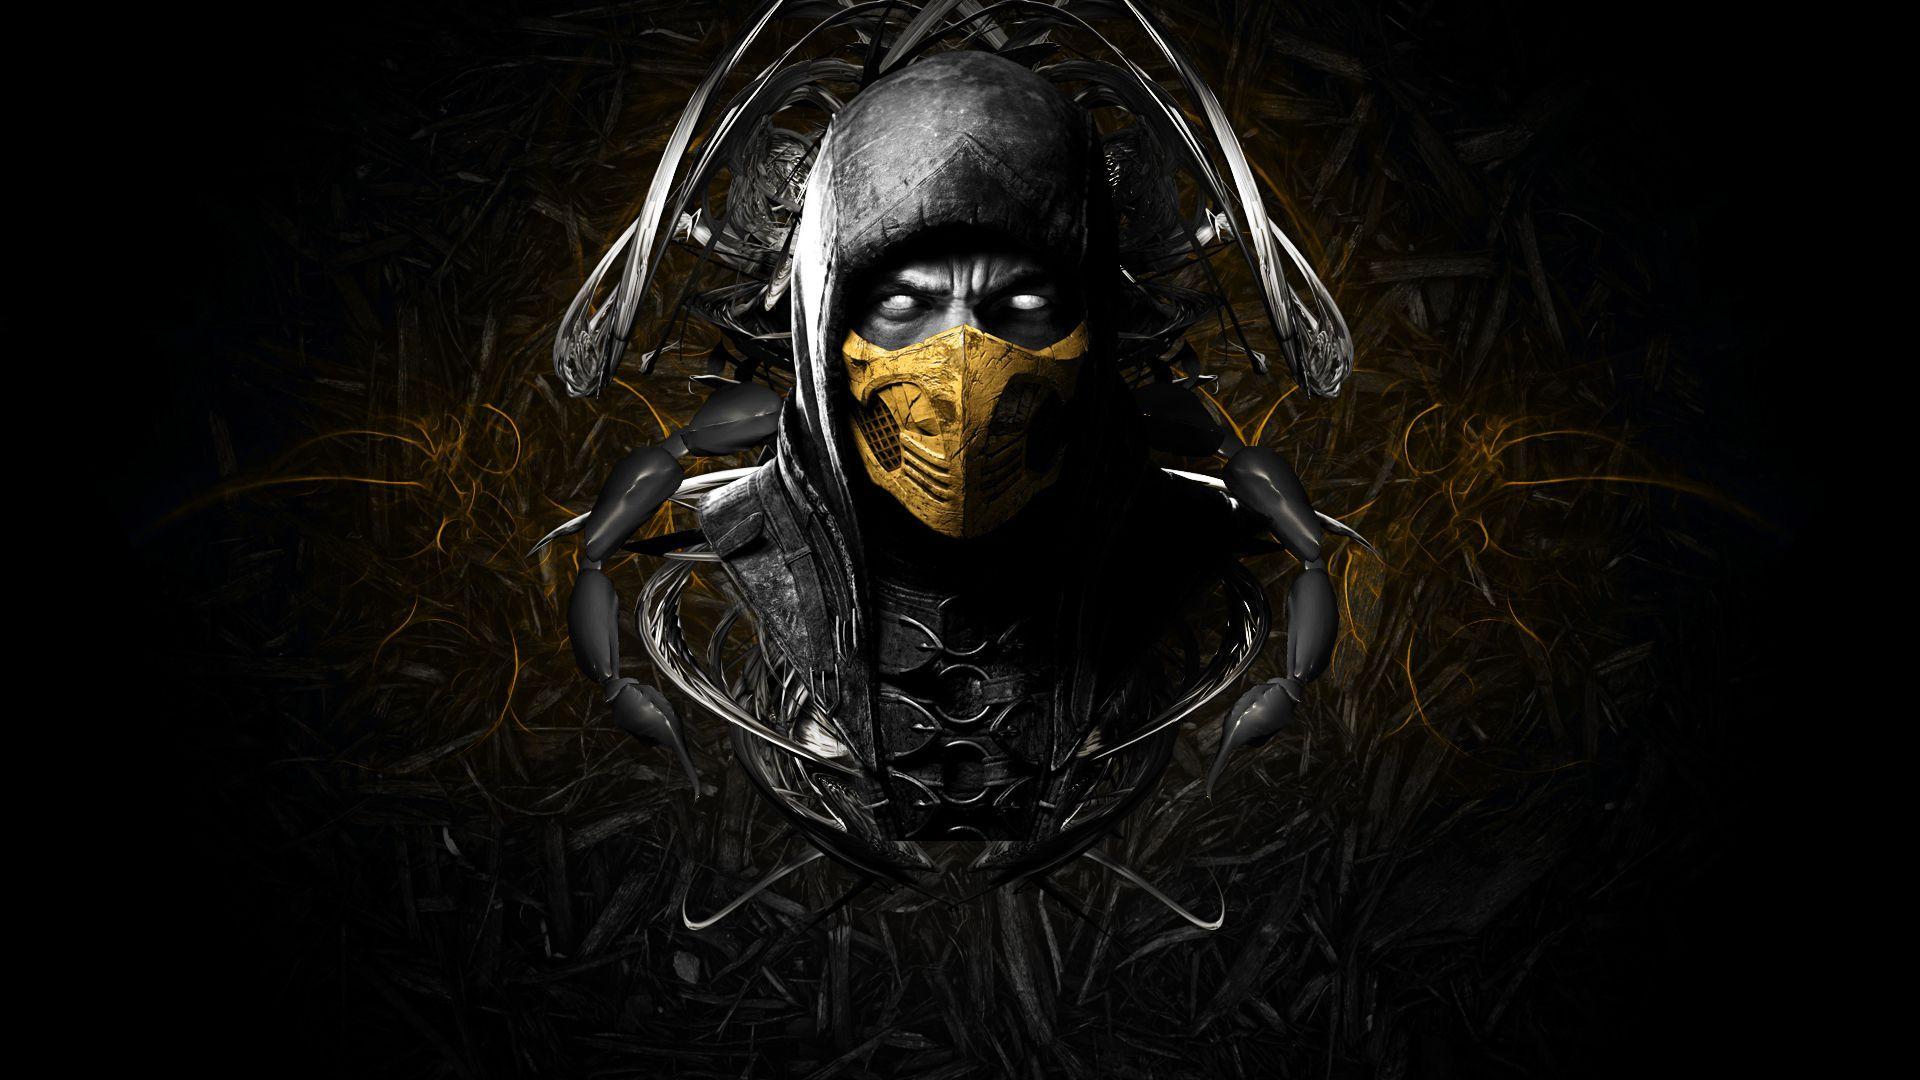 Here are some pretty cool wallpapers that I found  rMortalKombat